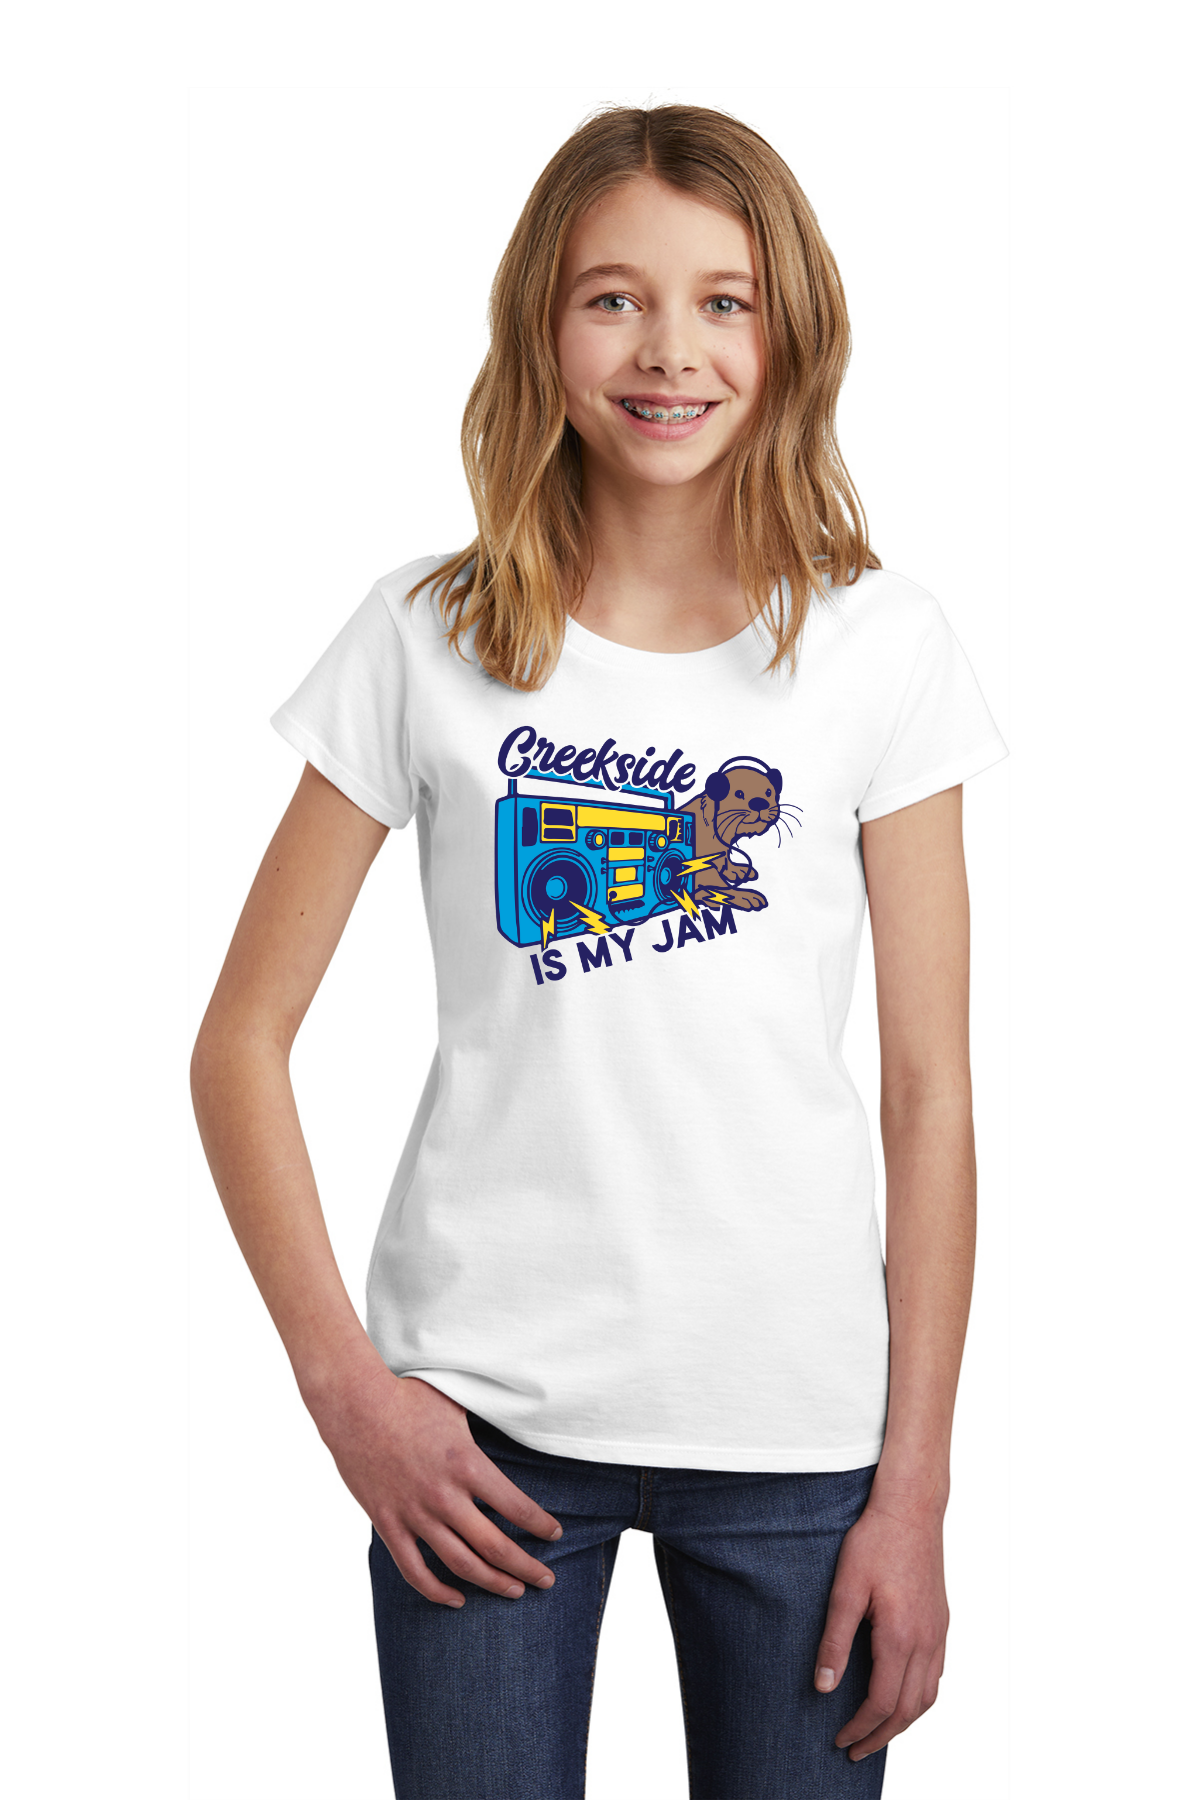 Kids Tennessee Smiley T-Shirt